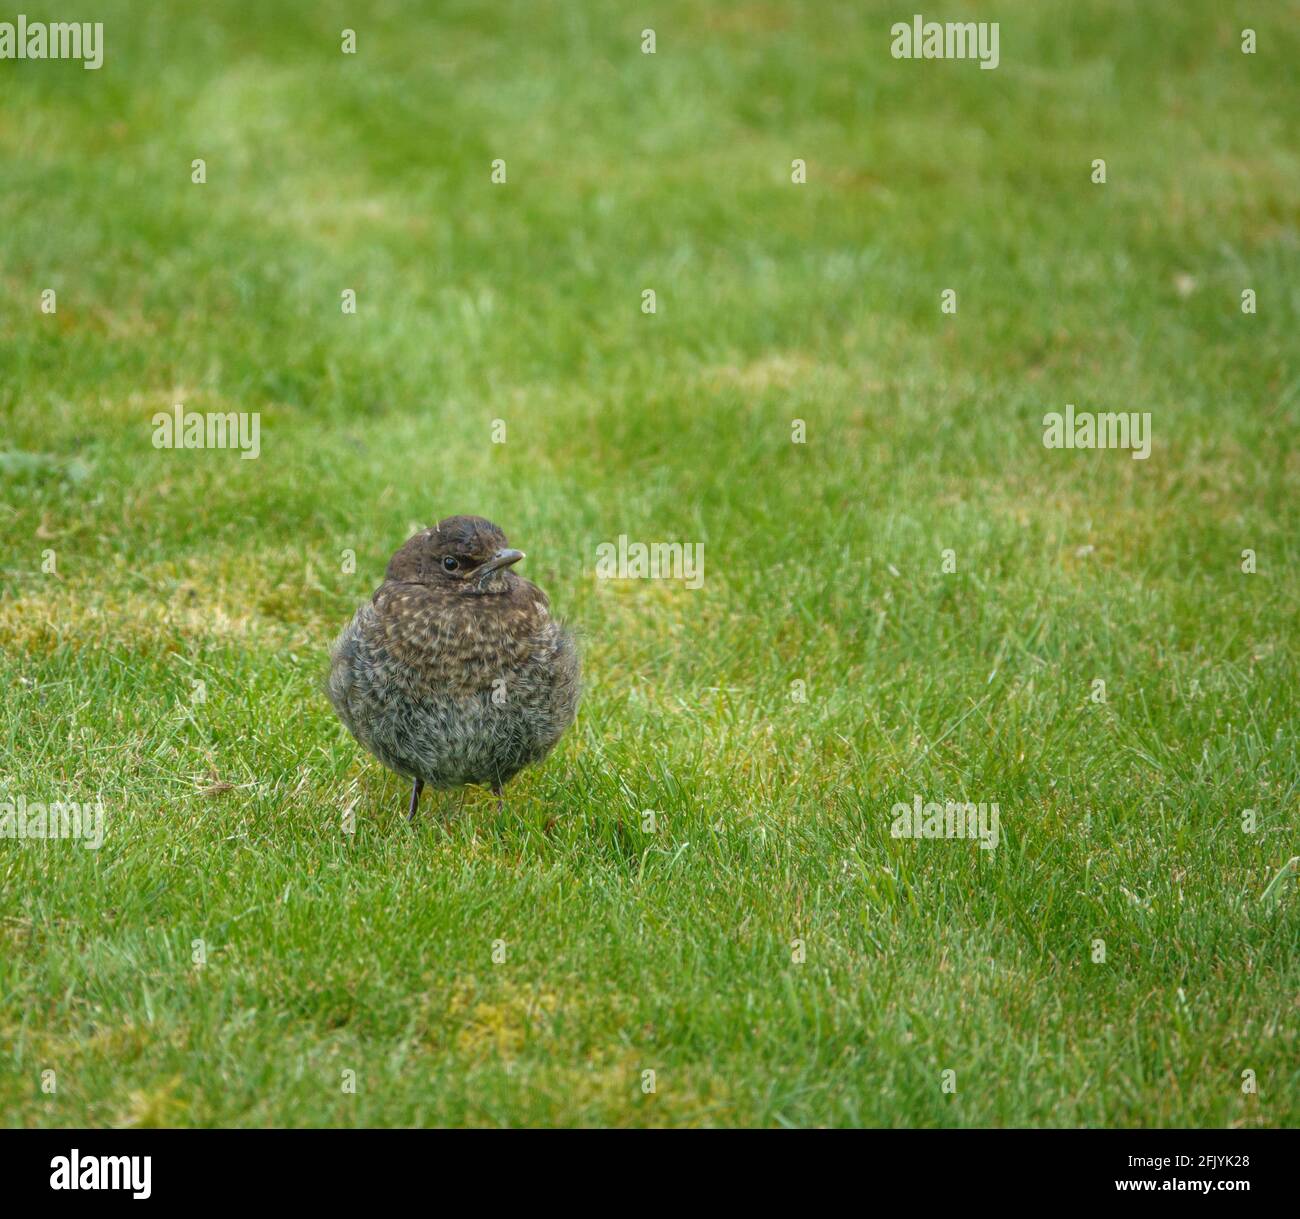 a fledgling blackbird (turdus merula) learning to hunt worms on the green grass lawn Stock Photo